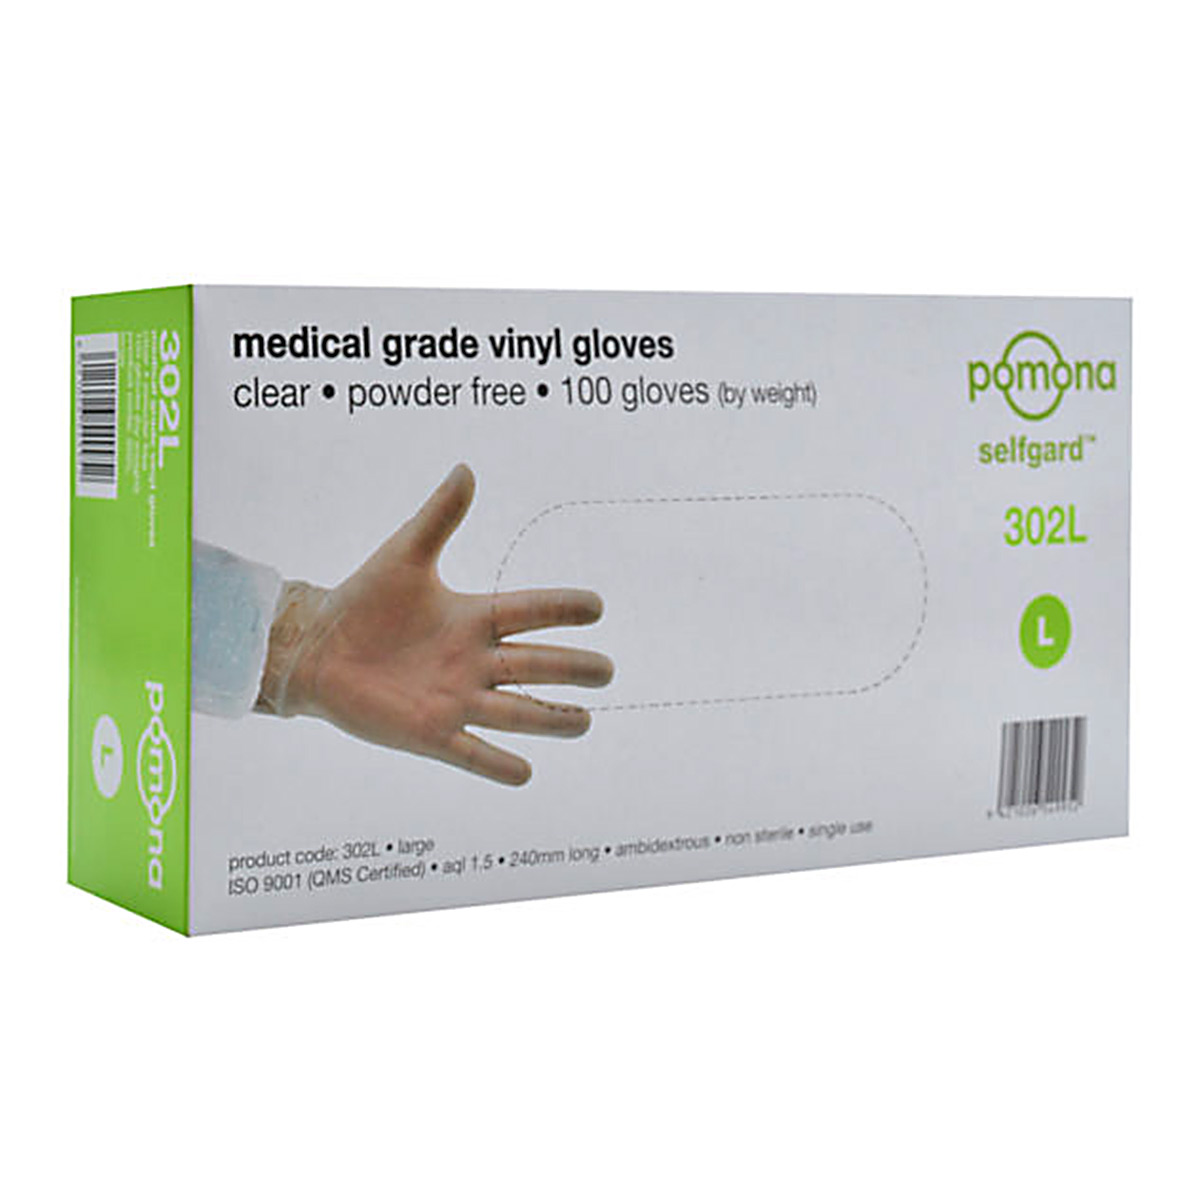 consumables-hospitality-gloves-pomona-vinyl-powderfree-glove-XL-100-pack-food-safe-clear-vinyl-economical-durable-comfortable-janitorial-food-production-food-service-industries-vjs-distributors-302XL